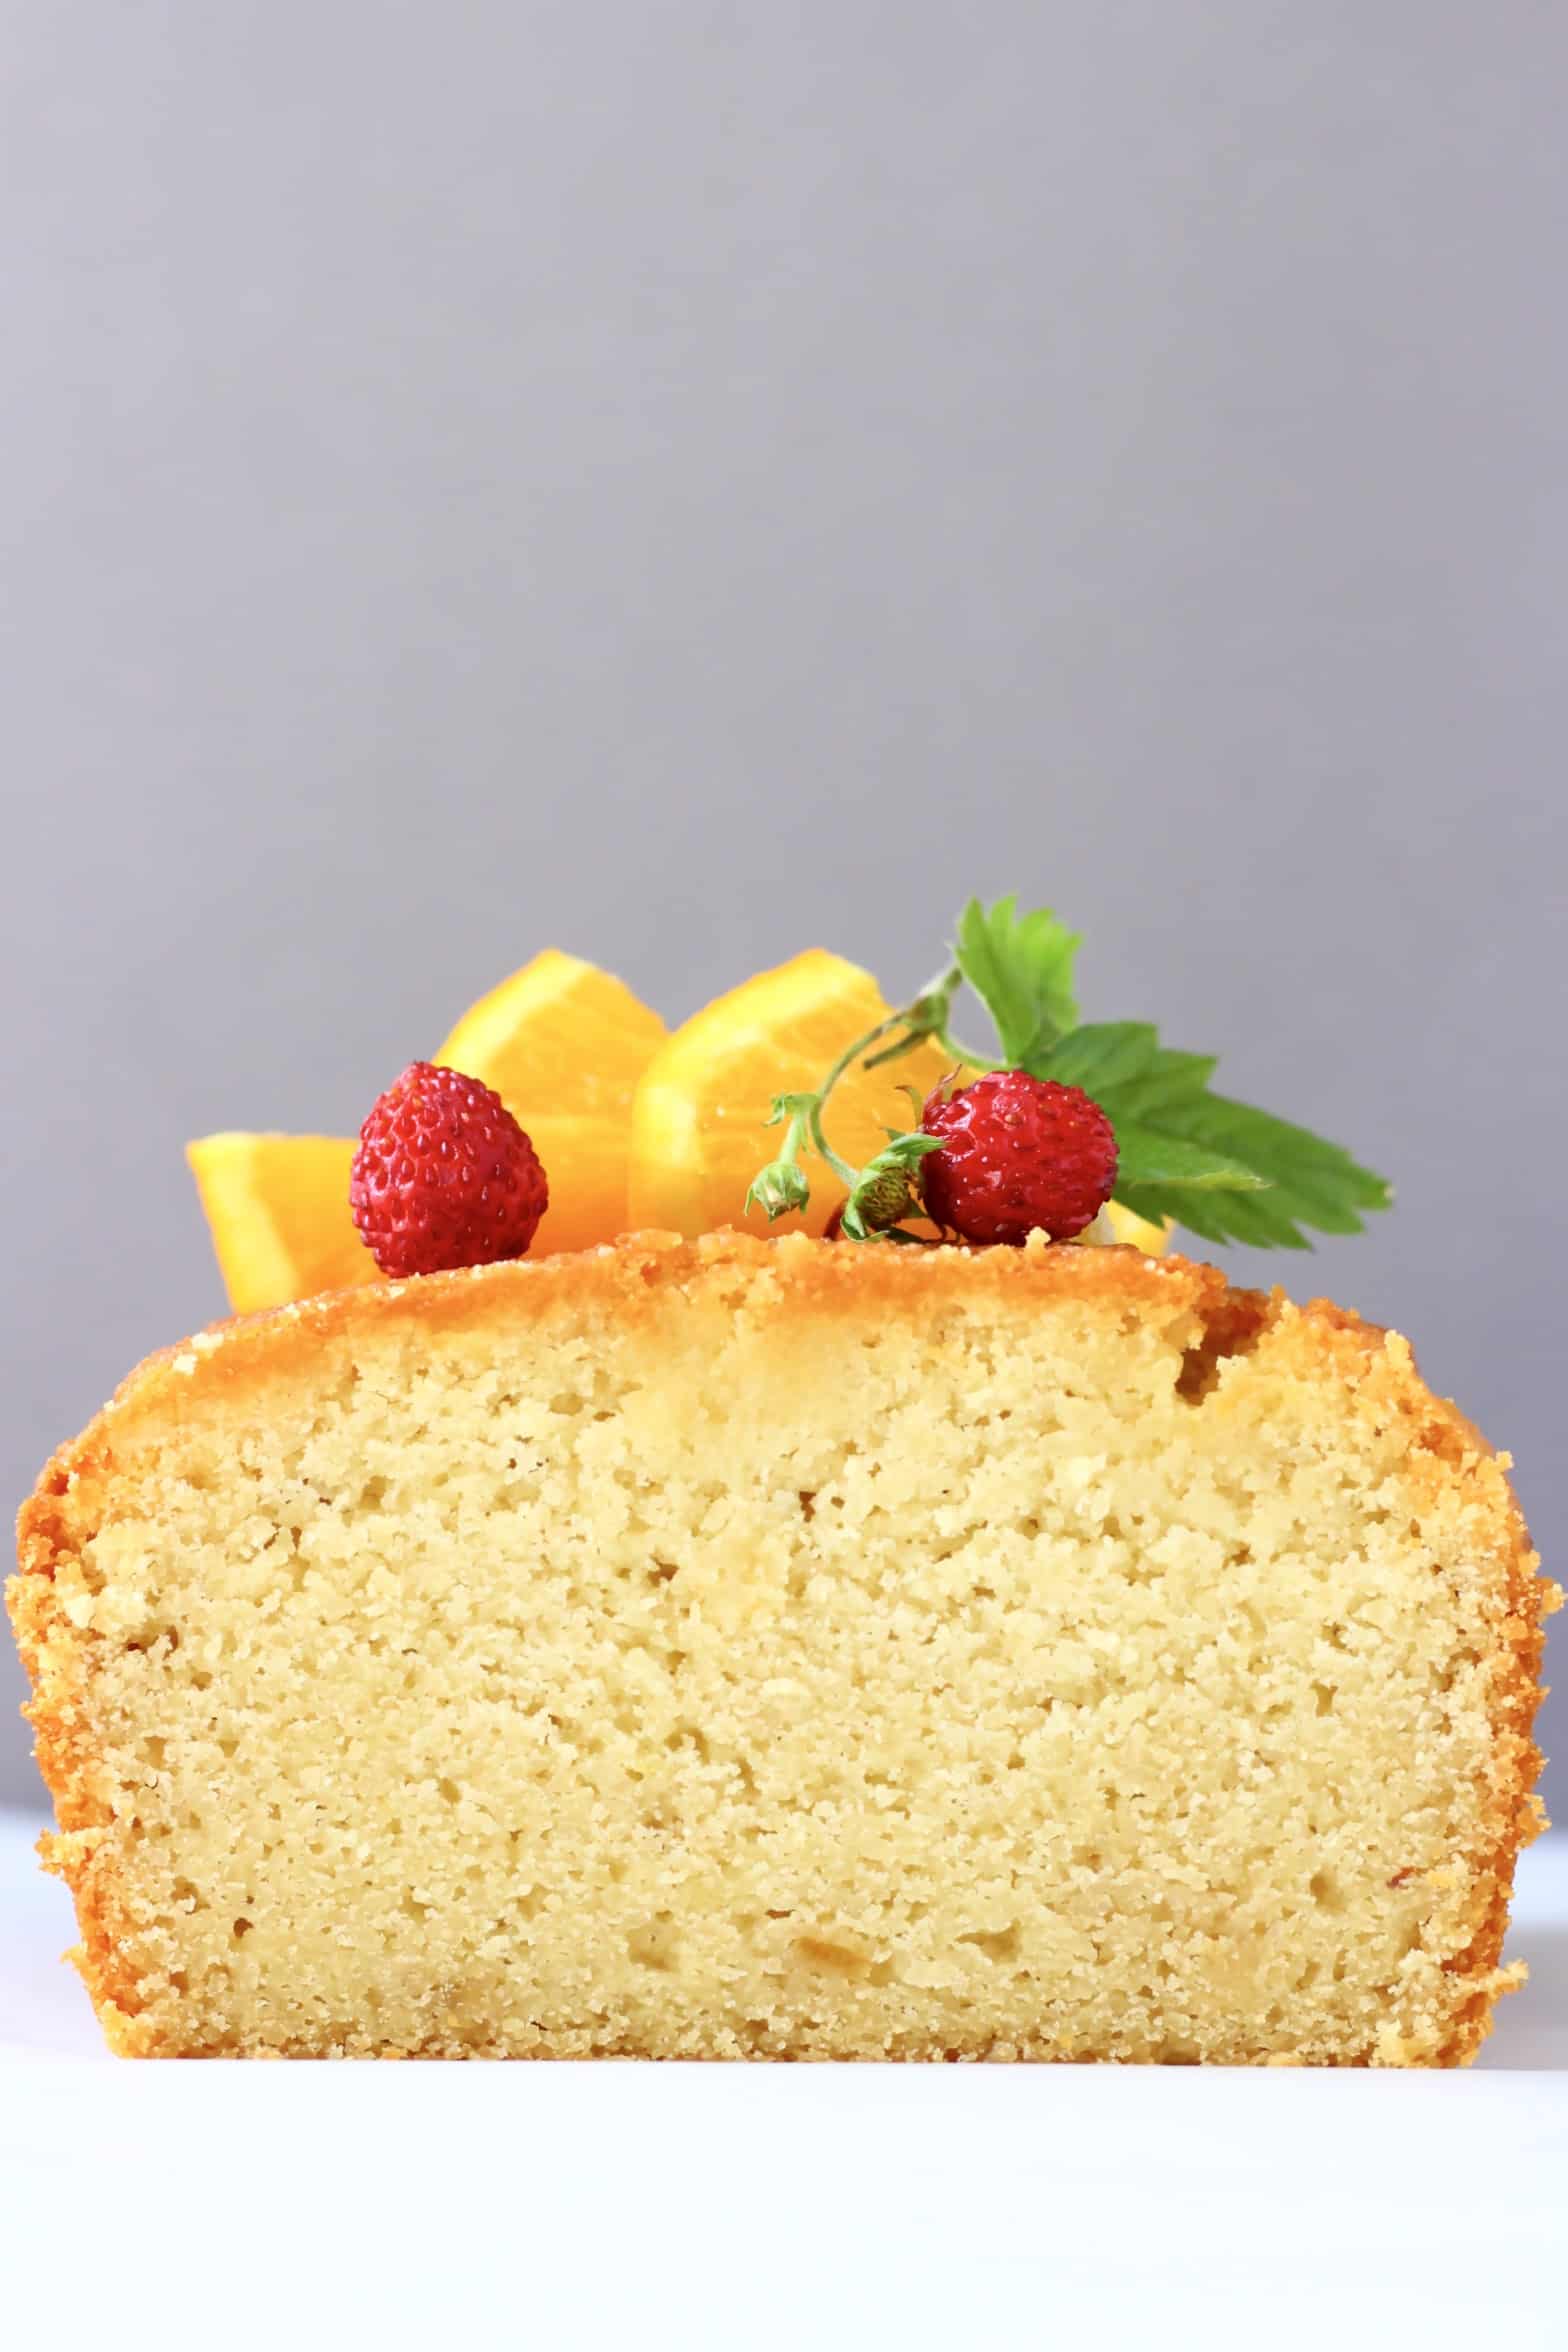 A sliced loaf of gluten-free vegan orange drizzle cake topped with orange slices